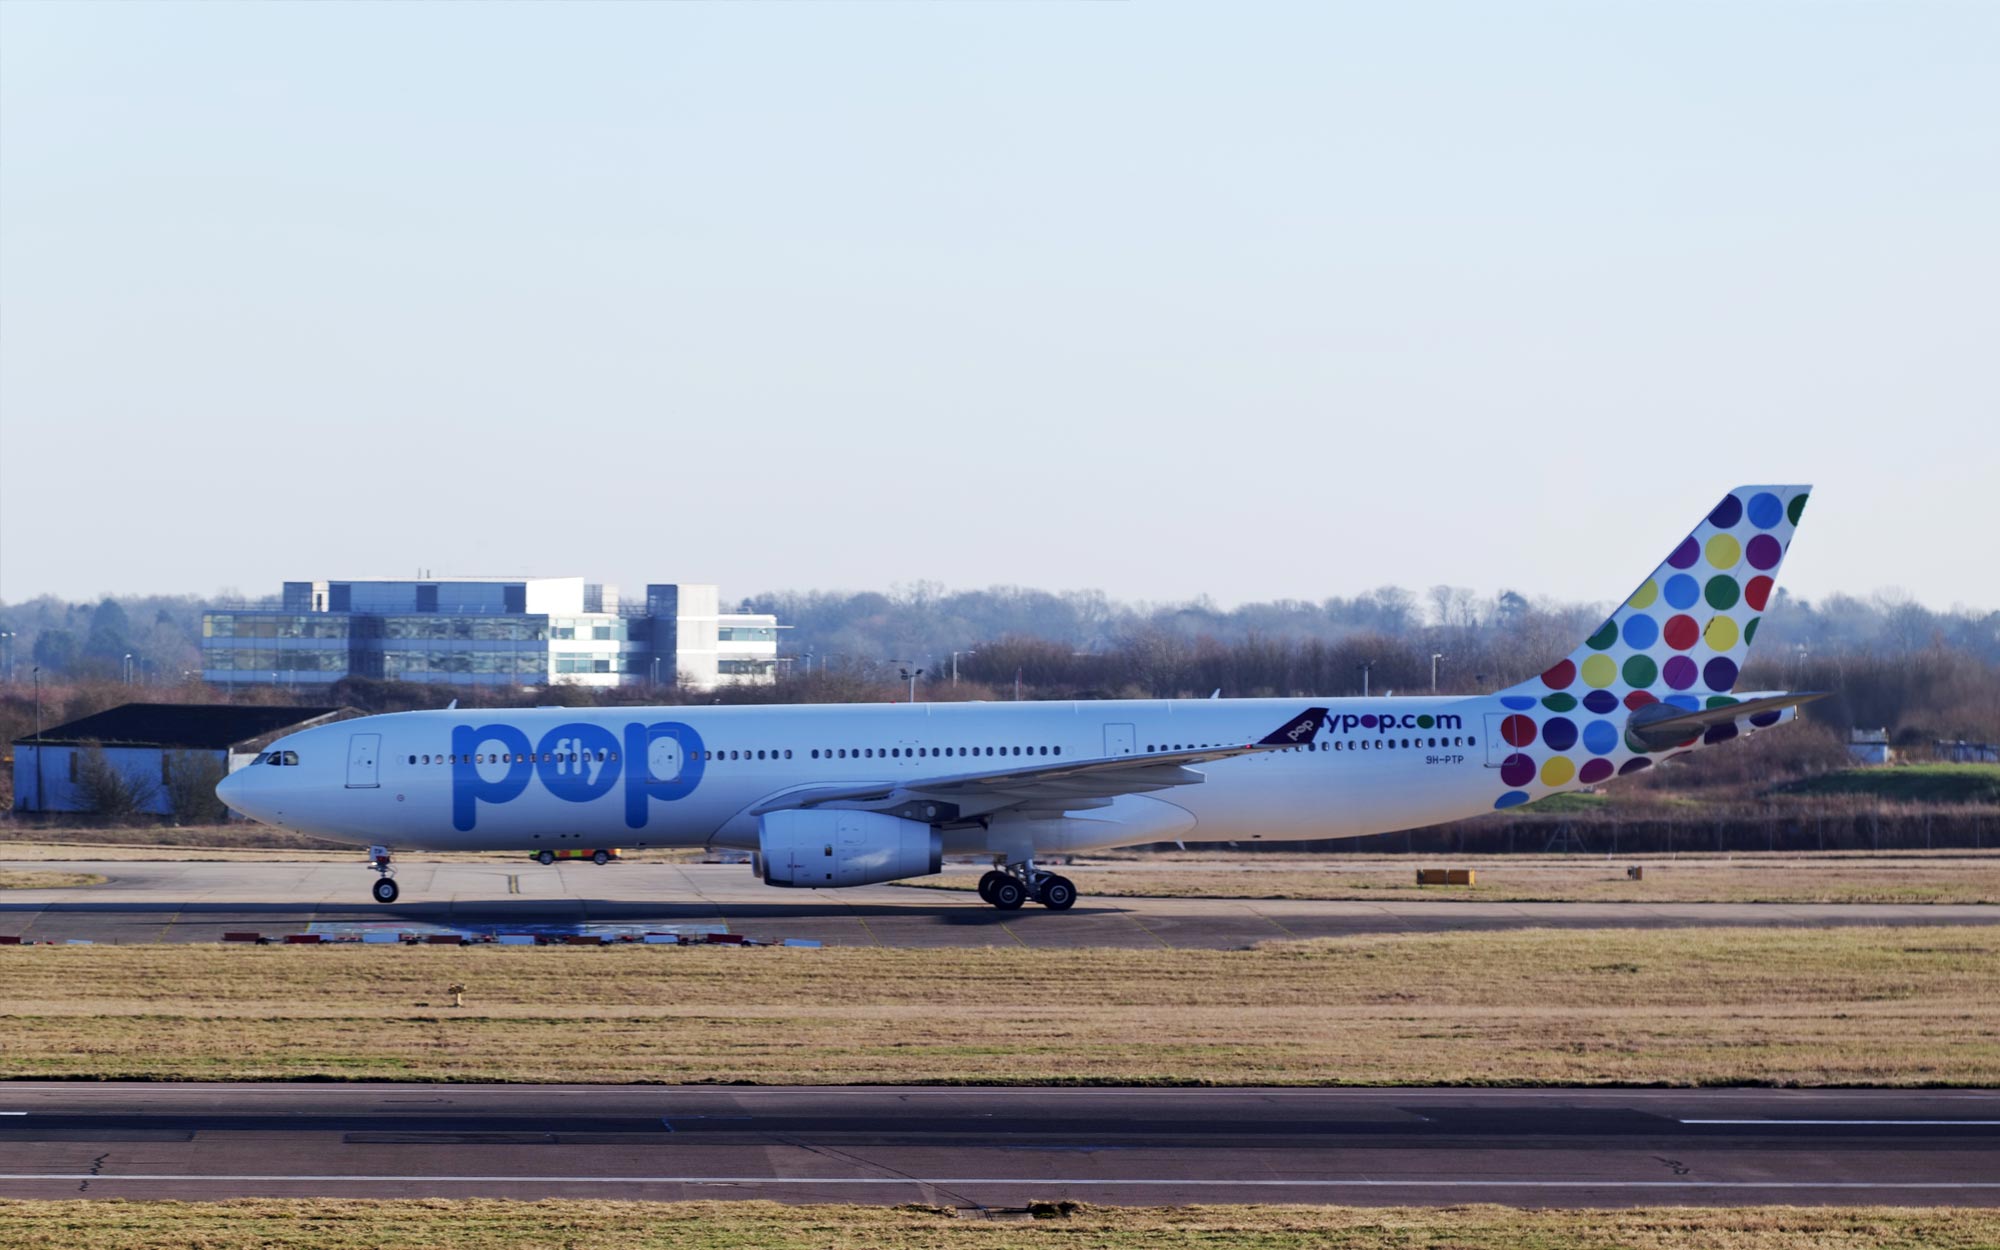 flypop second aircraft arrives in Stansted